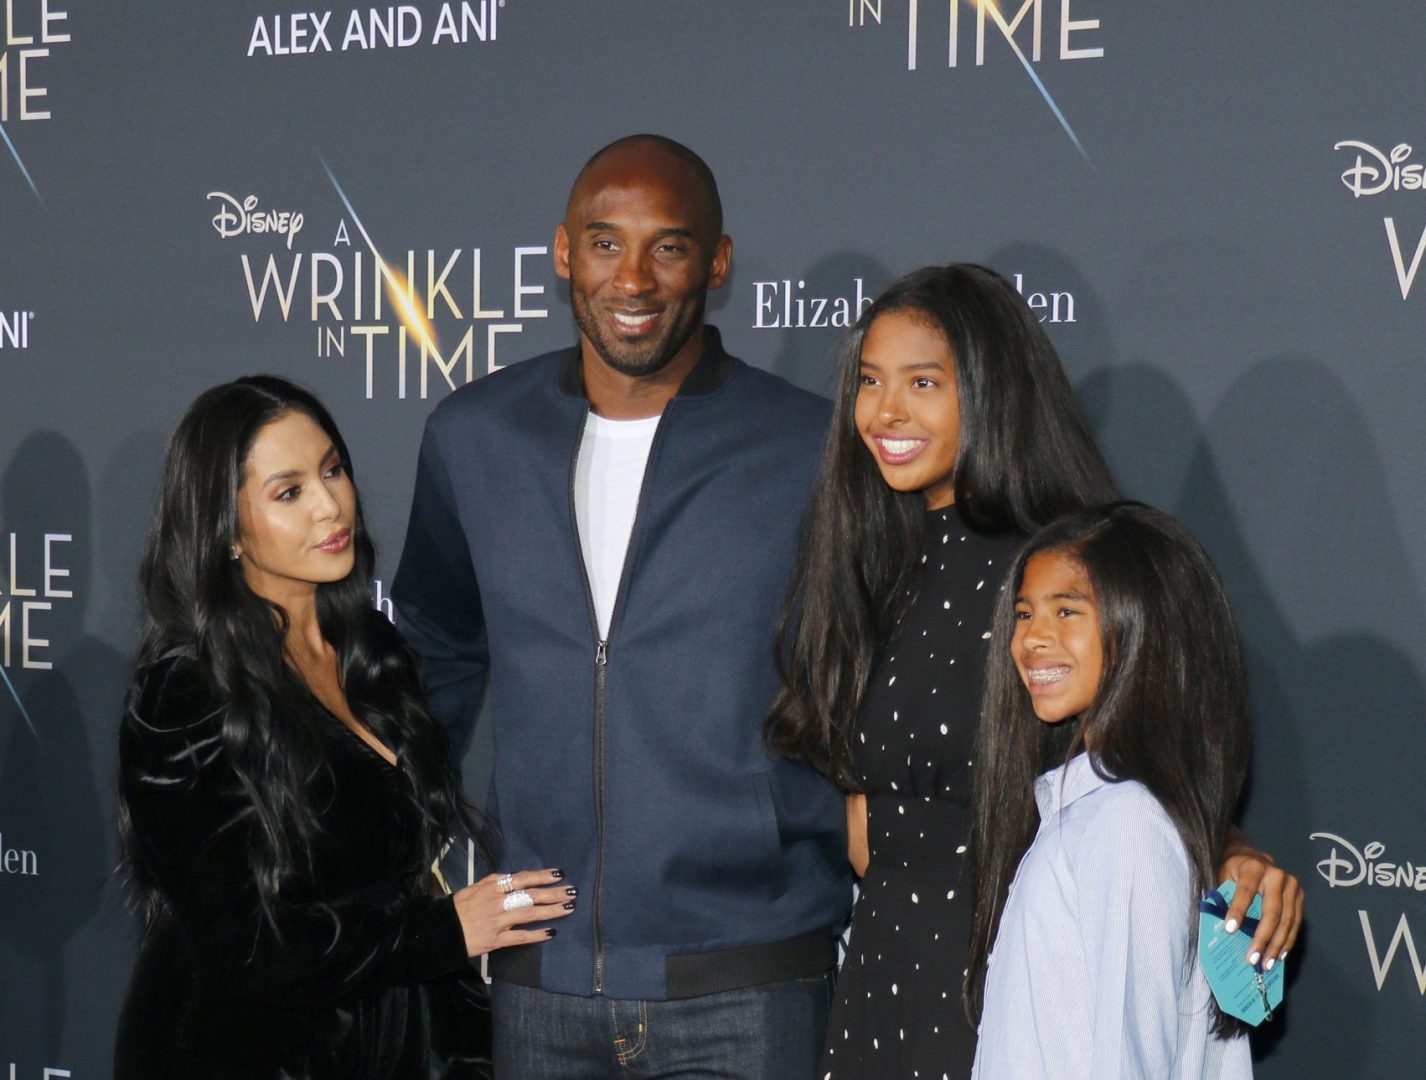 Kobe and Gianna Bryant have been laid to rest